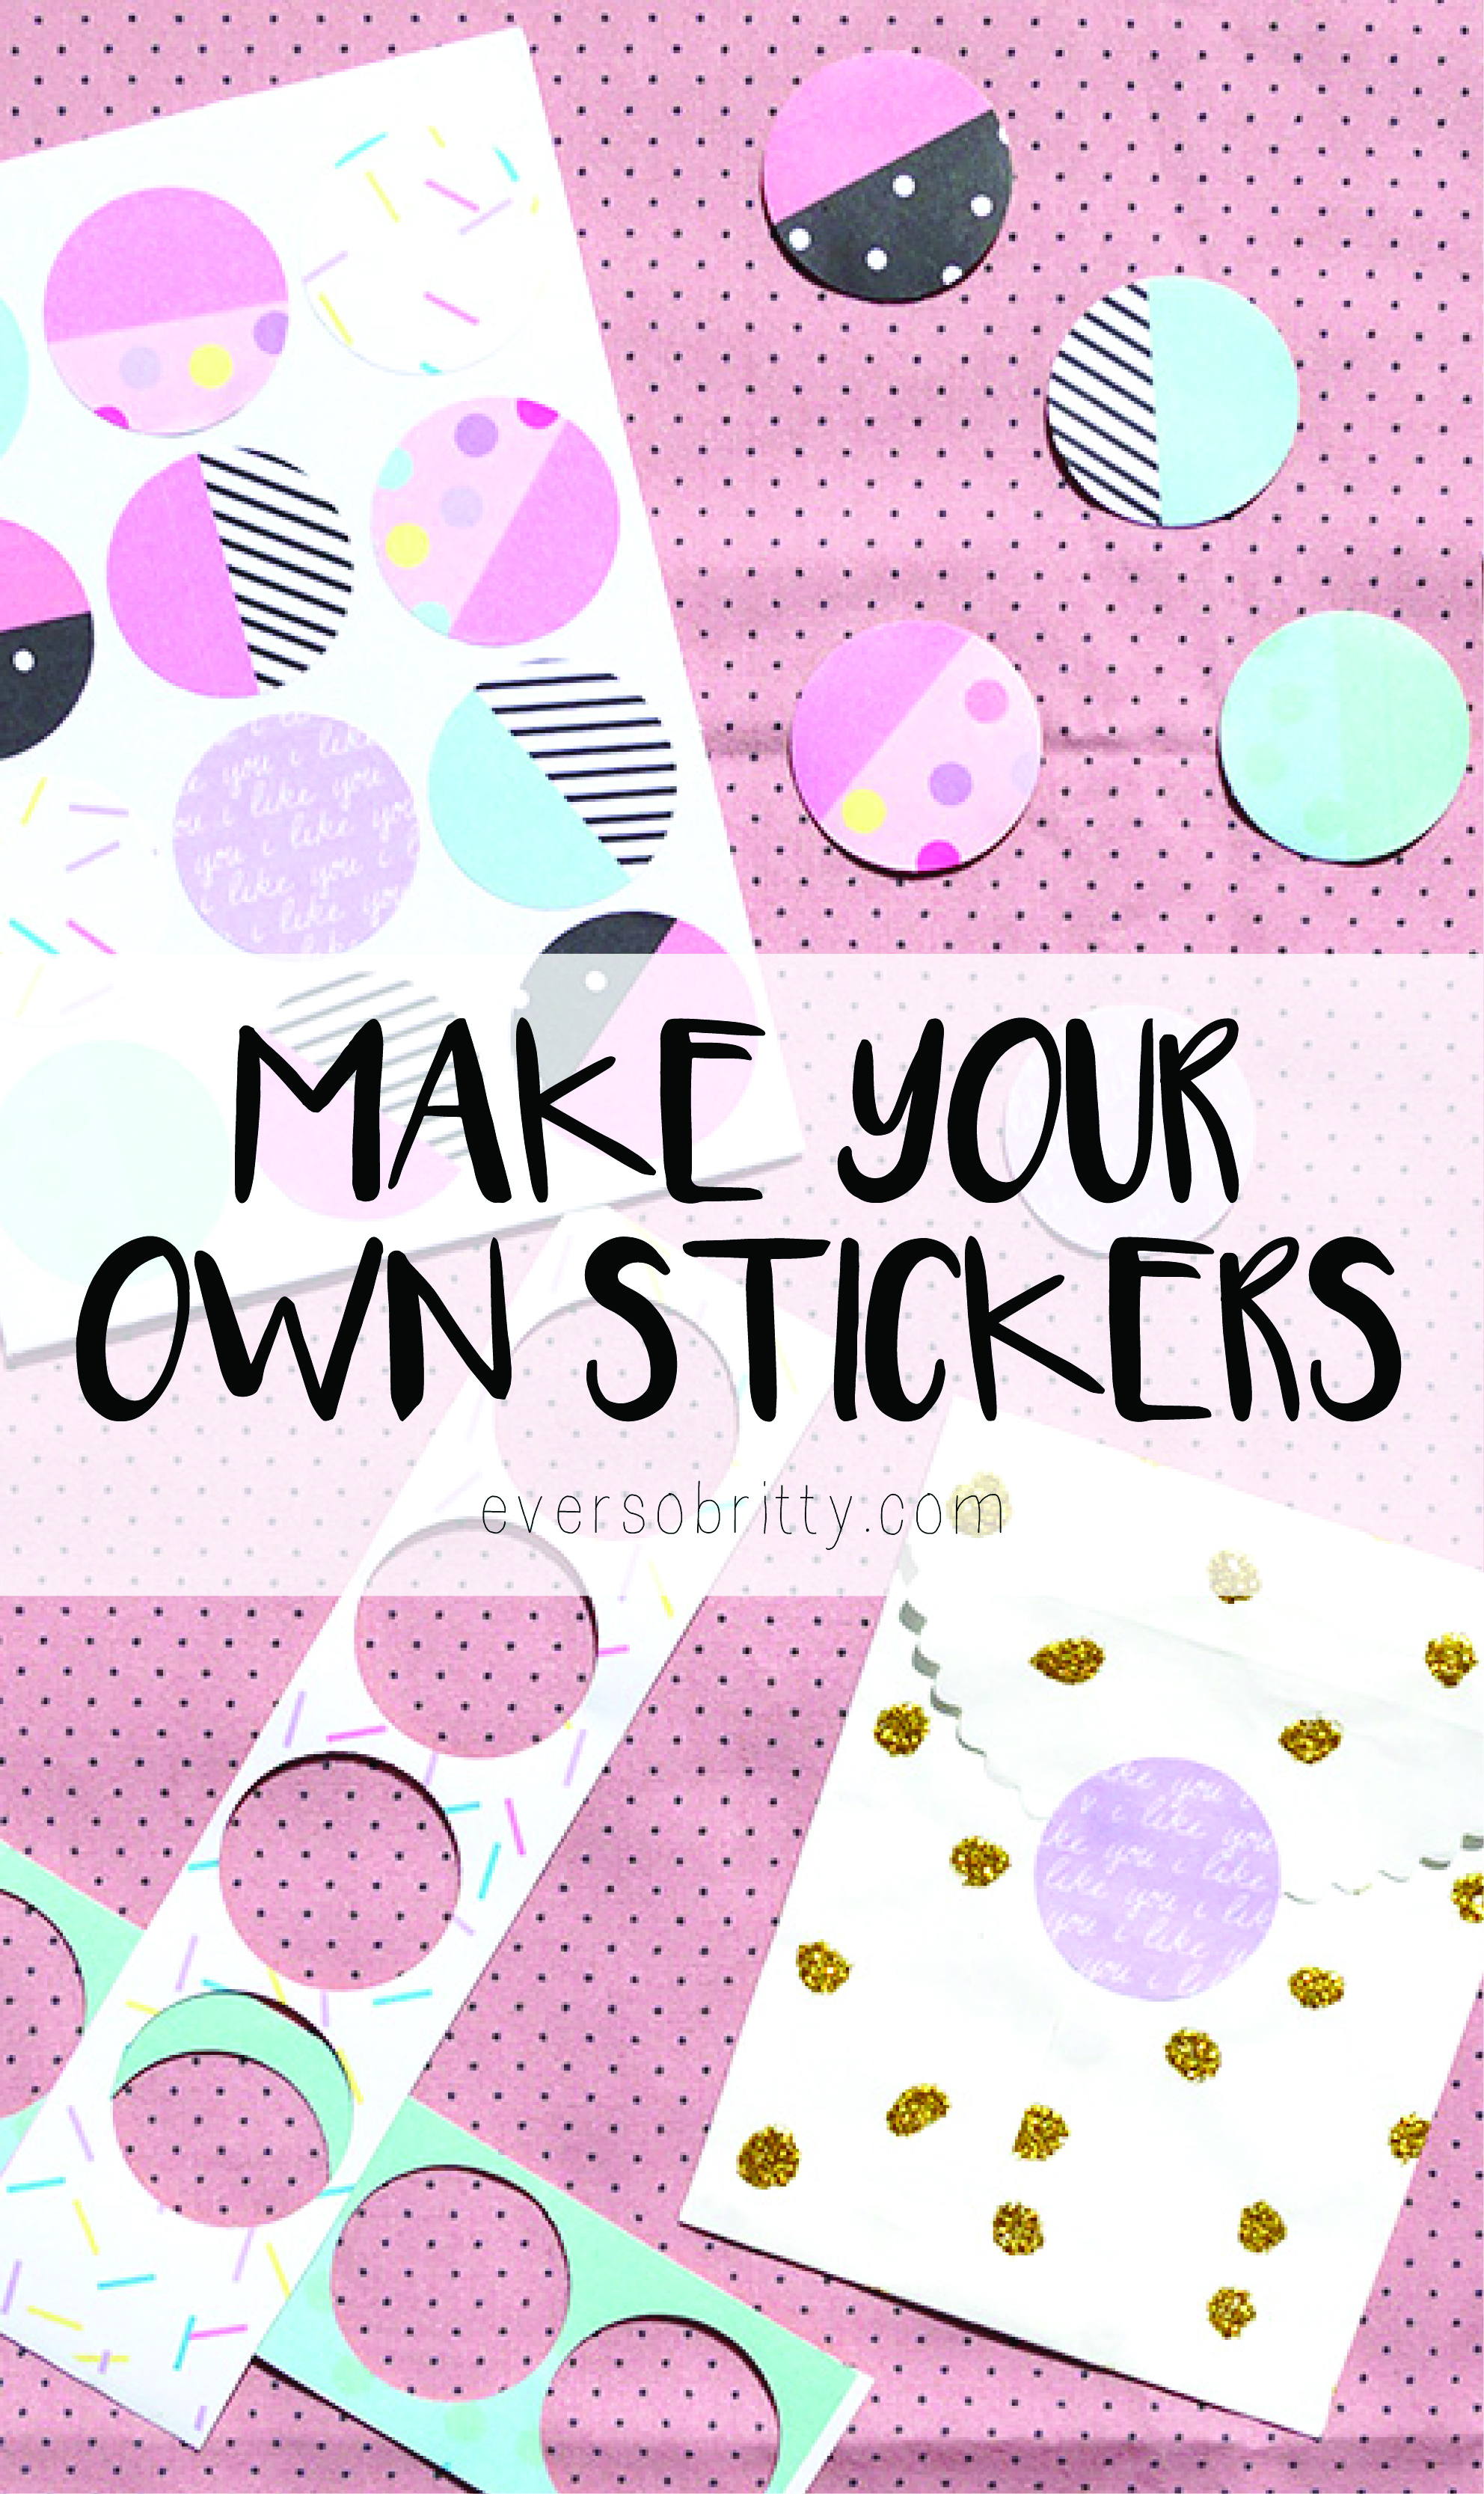 make your own stickers free printable ever so britty